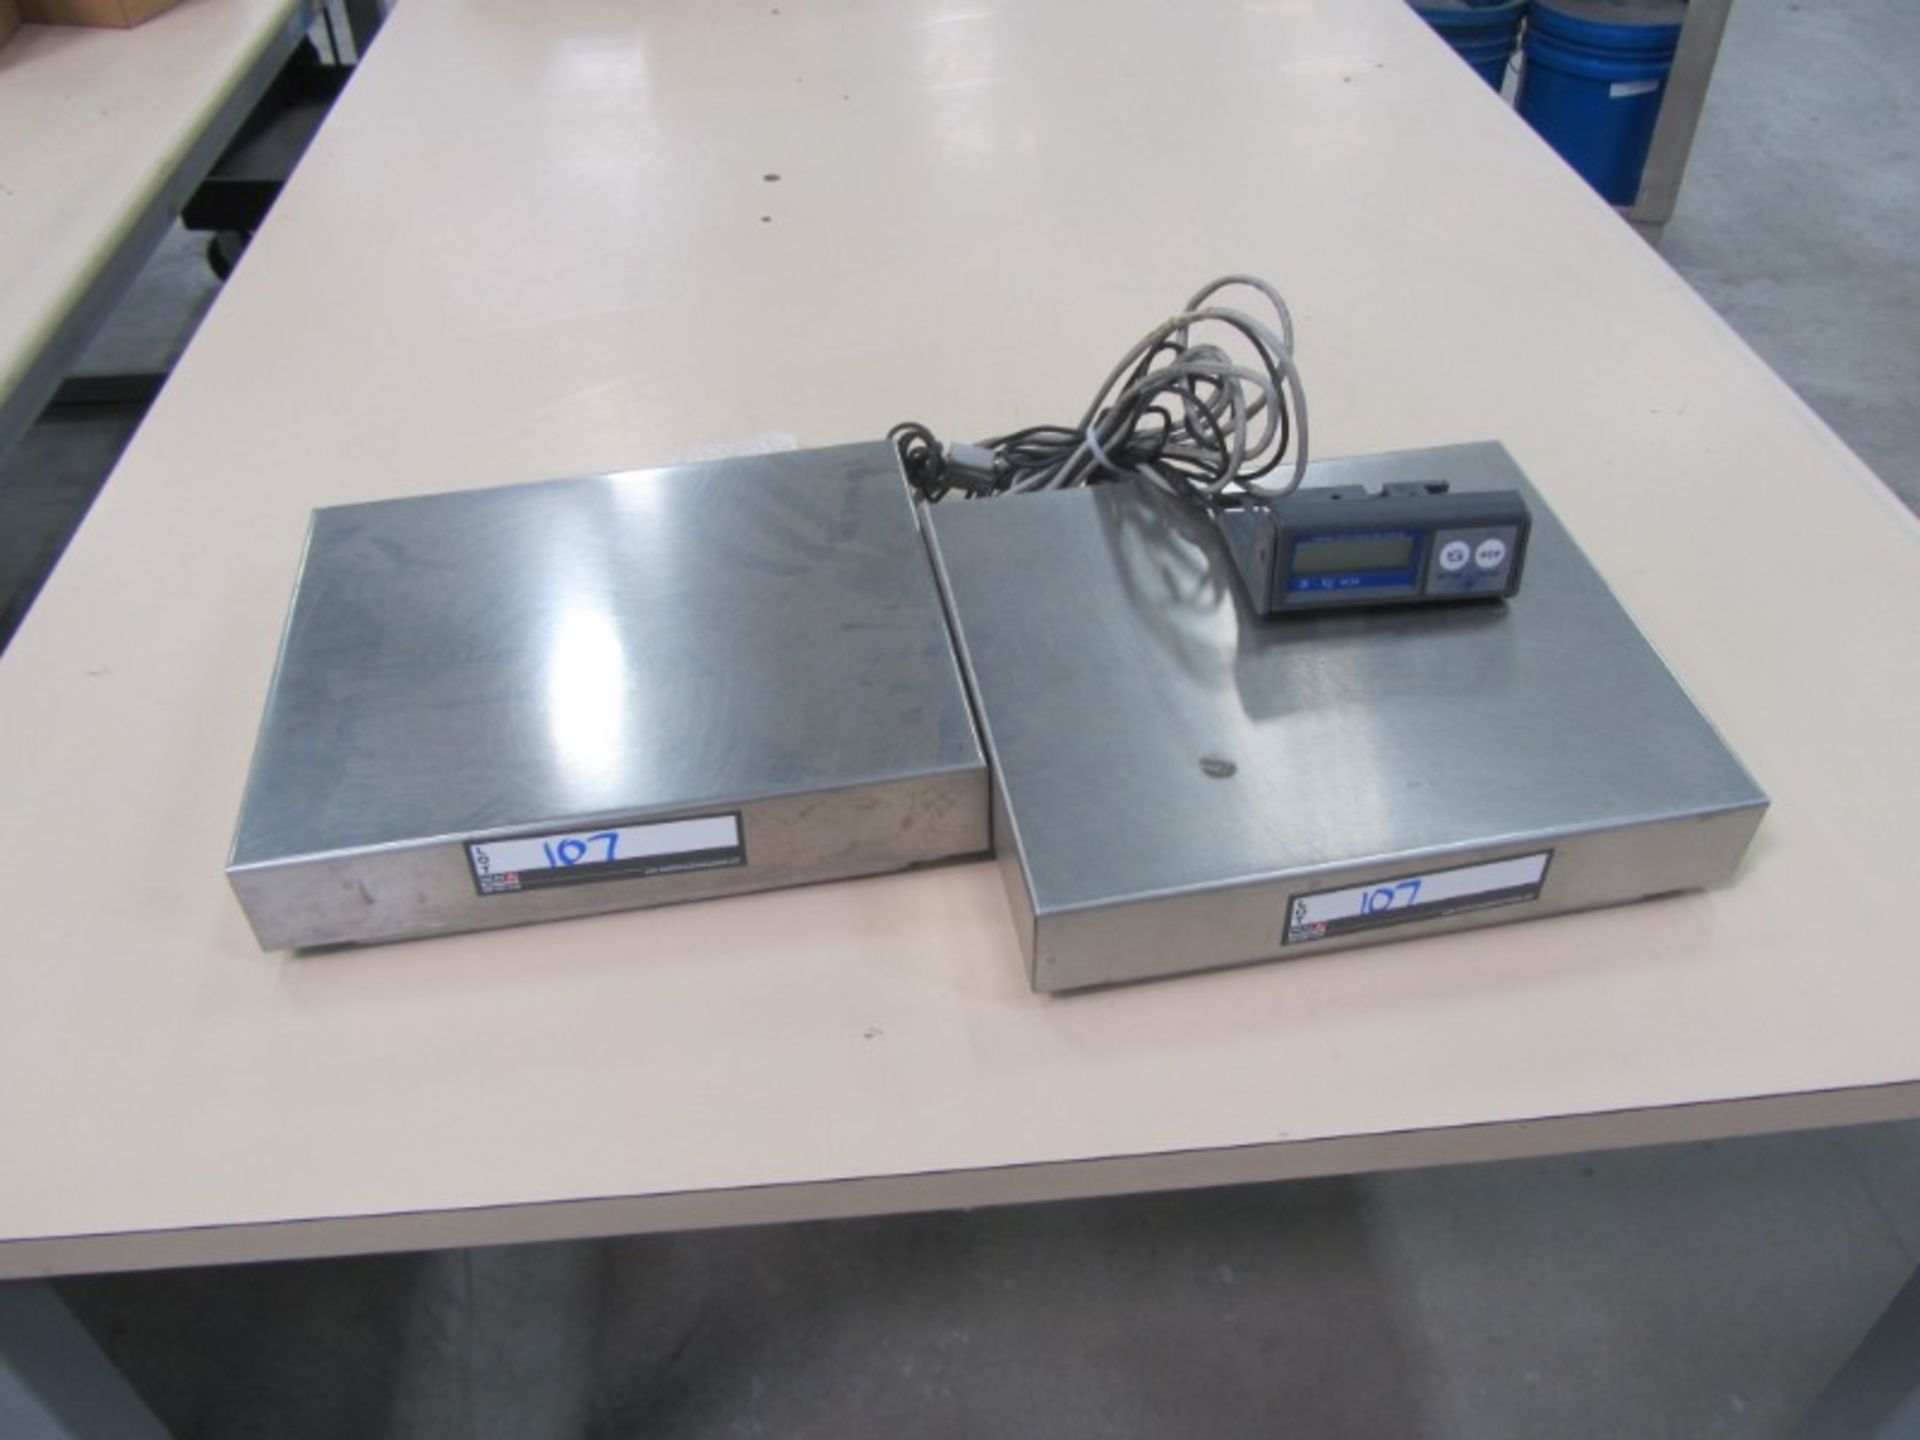 Lot of (2) Digital Scales with 1 read out